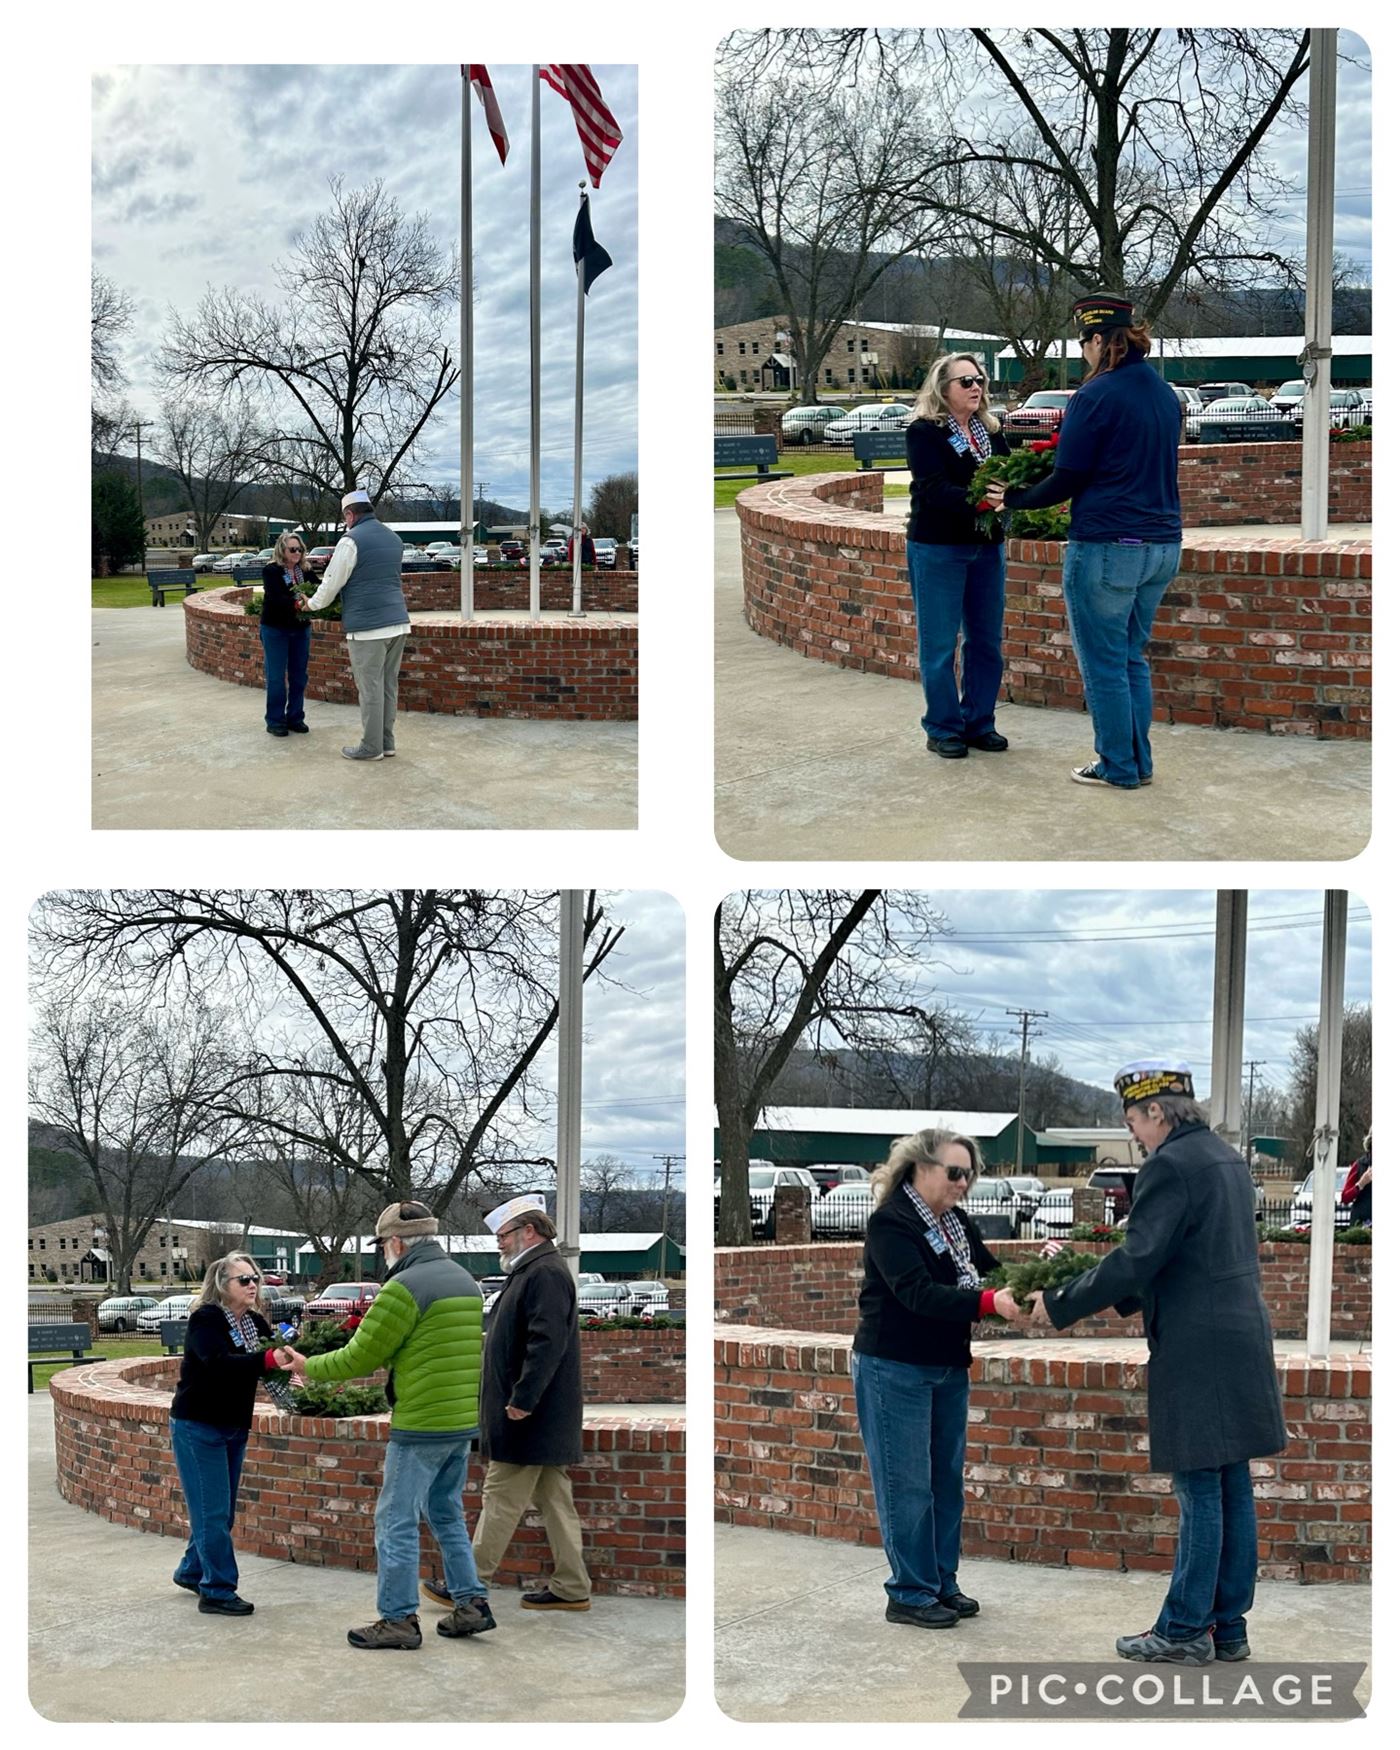 Diane Hill, HWA DAR Service to Veterans Chair, presents wreaths to veterans to place at flags for Army, Marines, Air Force, Space Force